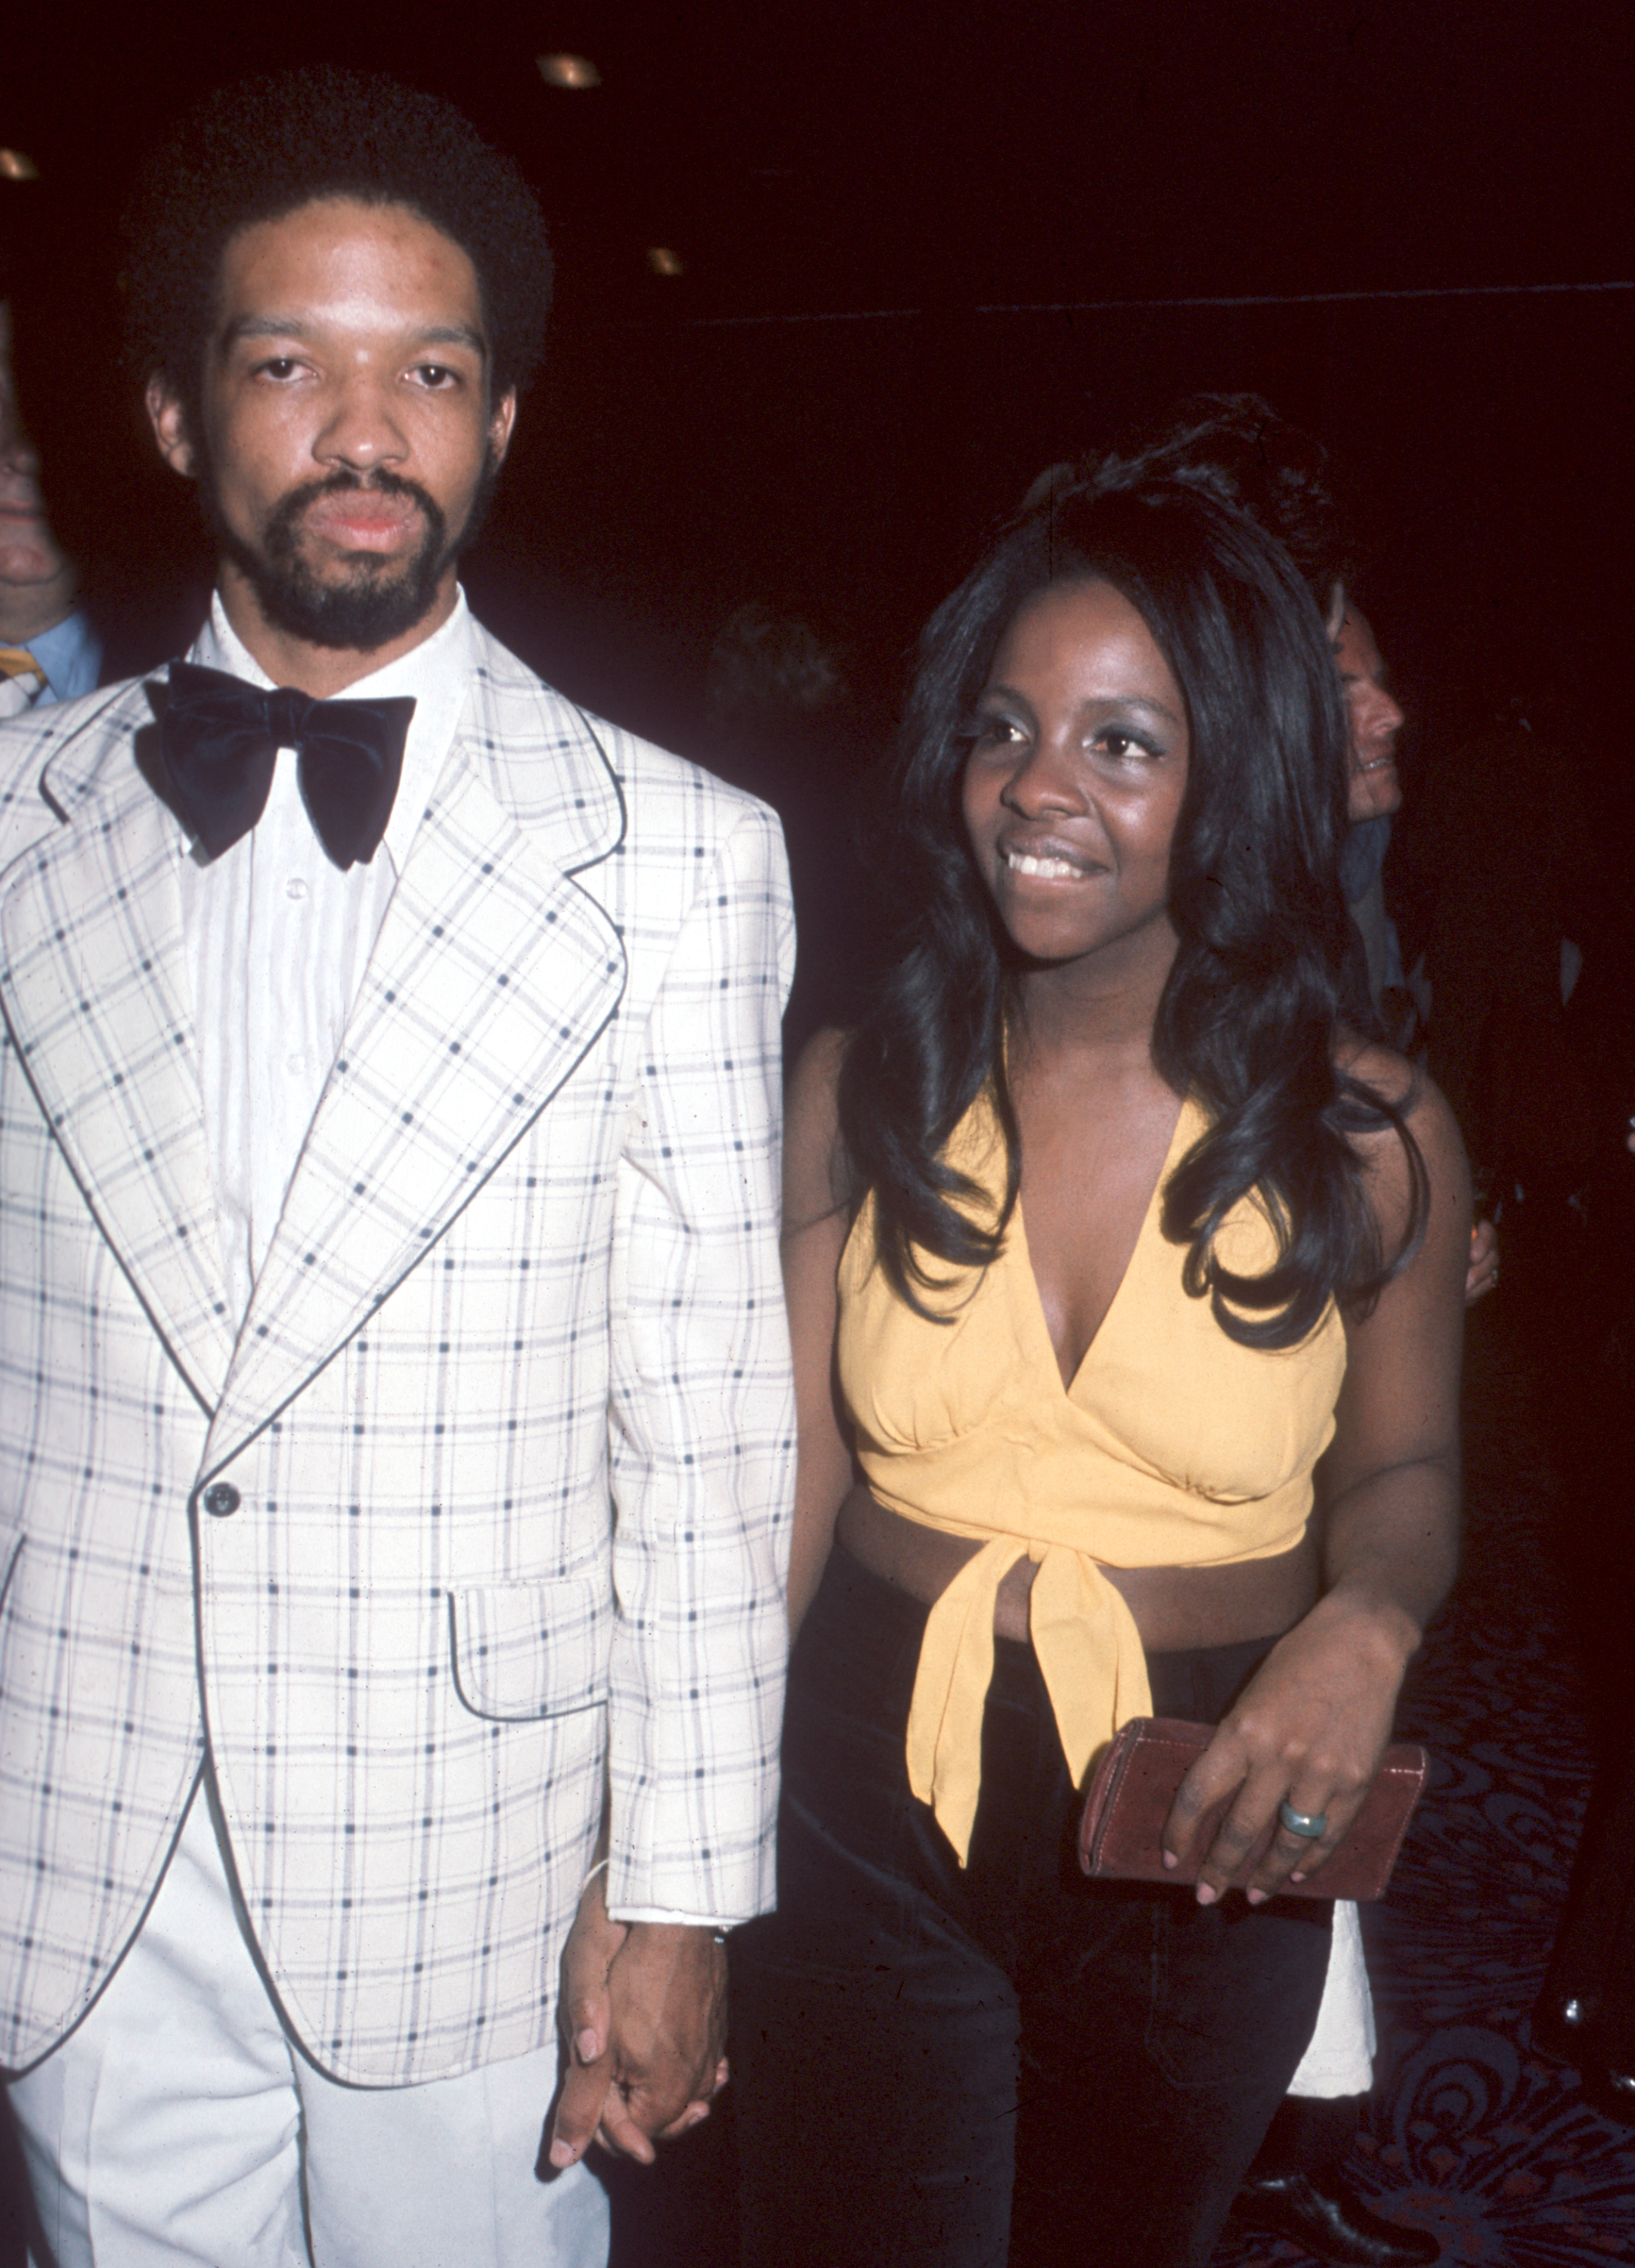 Gladys Knight and her then-husband Barry Hankerson at an event, circa 1975, in Los Angeles, California | Source: Getty Images